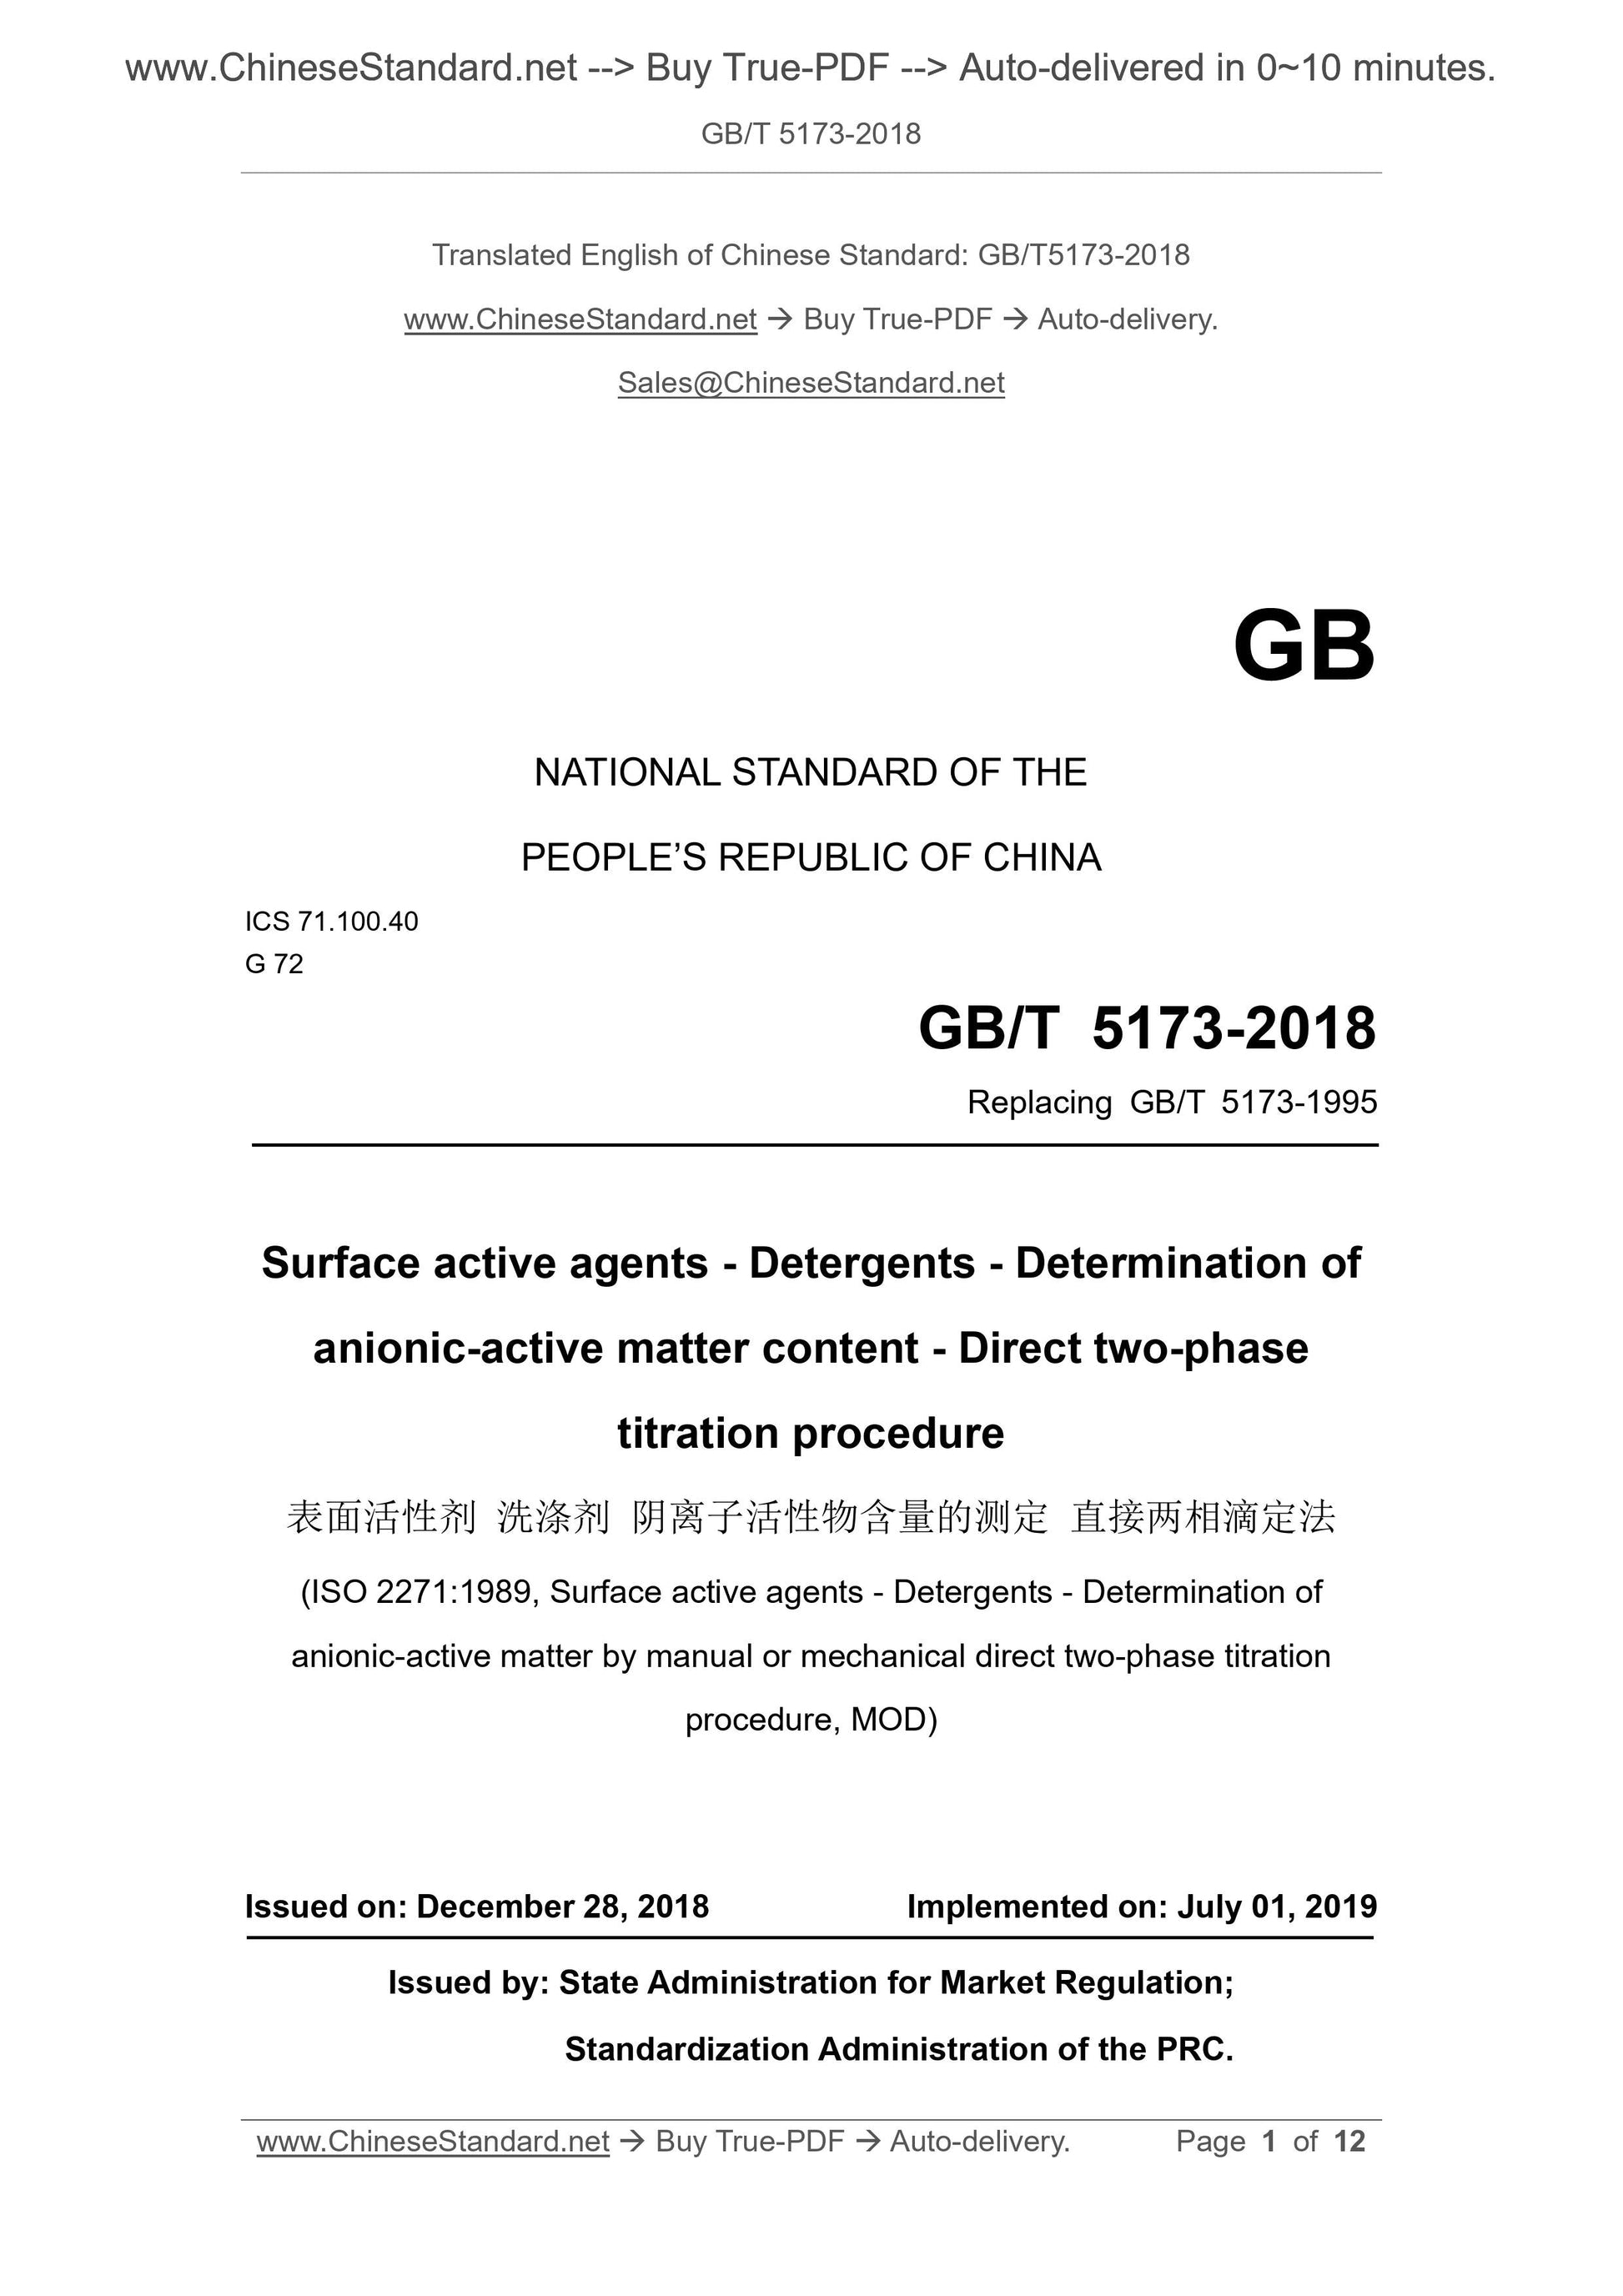 GB/T 5173-2018 Page 1